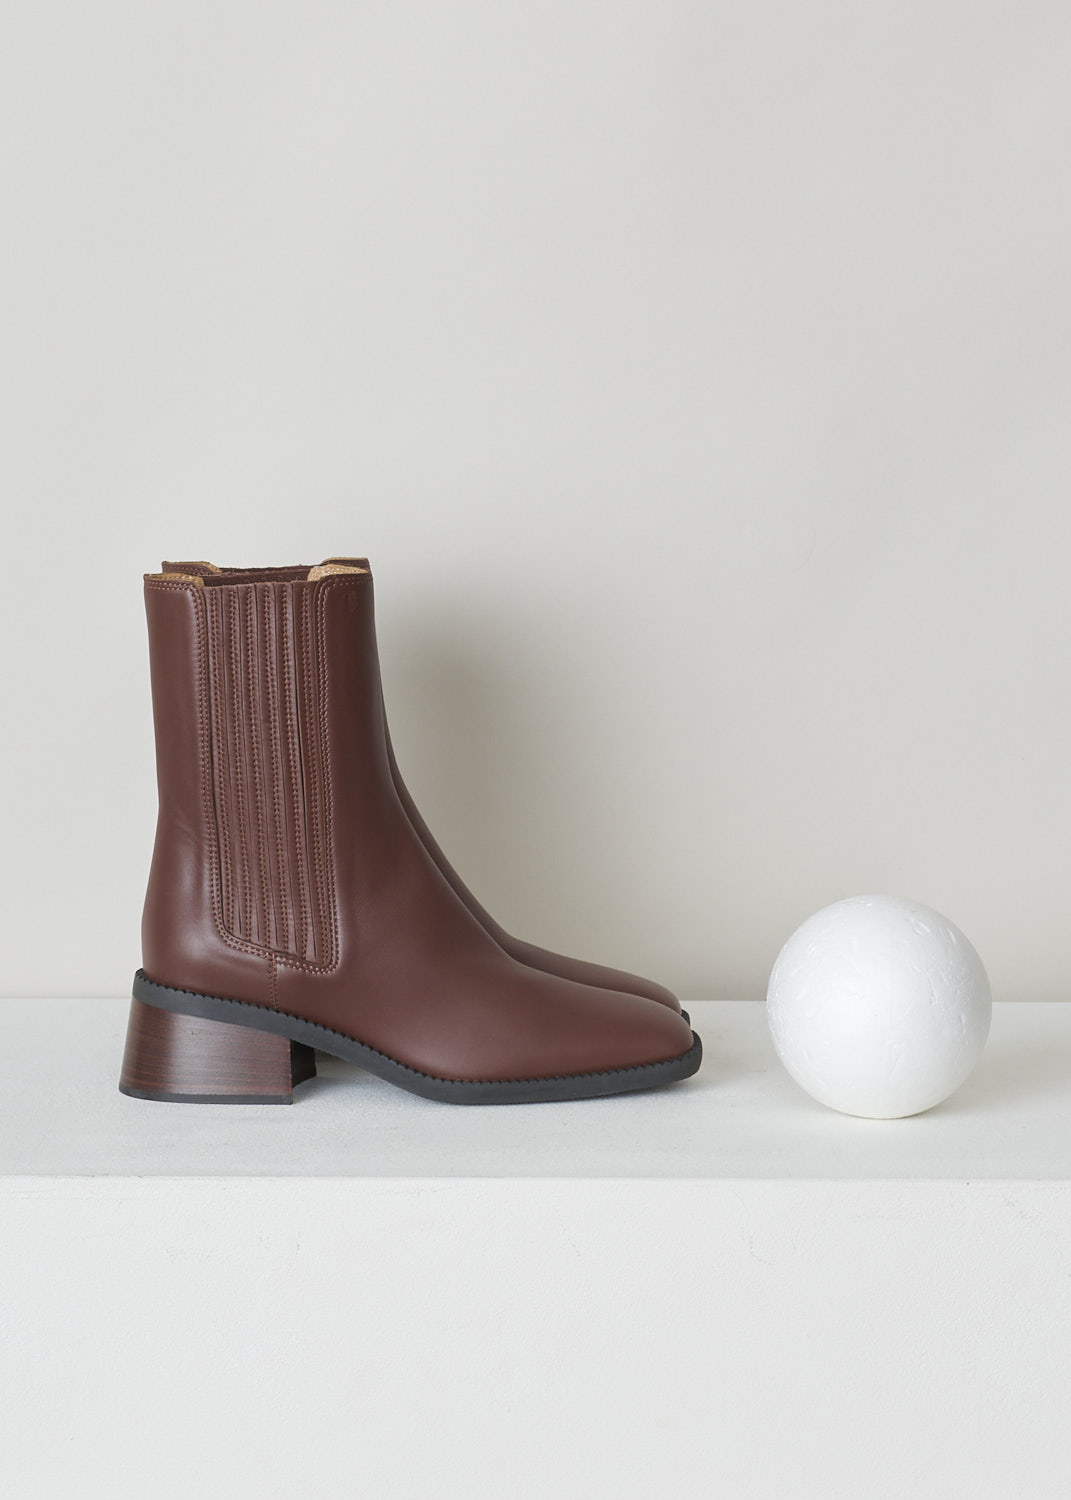 TODS, WARM BROWN BOOTS WITH GUSSETED SIDES, XXW48K0FX80TFSS202_T55_TRONCH_ELAST, Brown, Side, These warm brown leather slip-on boots feature elasticated gusseted sides with a ribbed pattern, a squared toe and a block heel in brown. 

